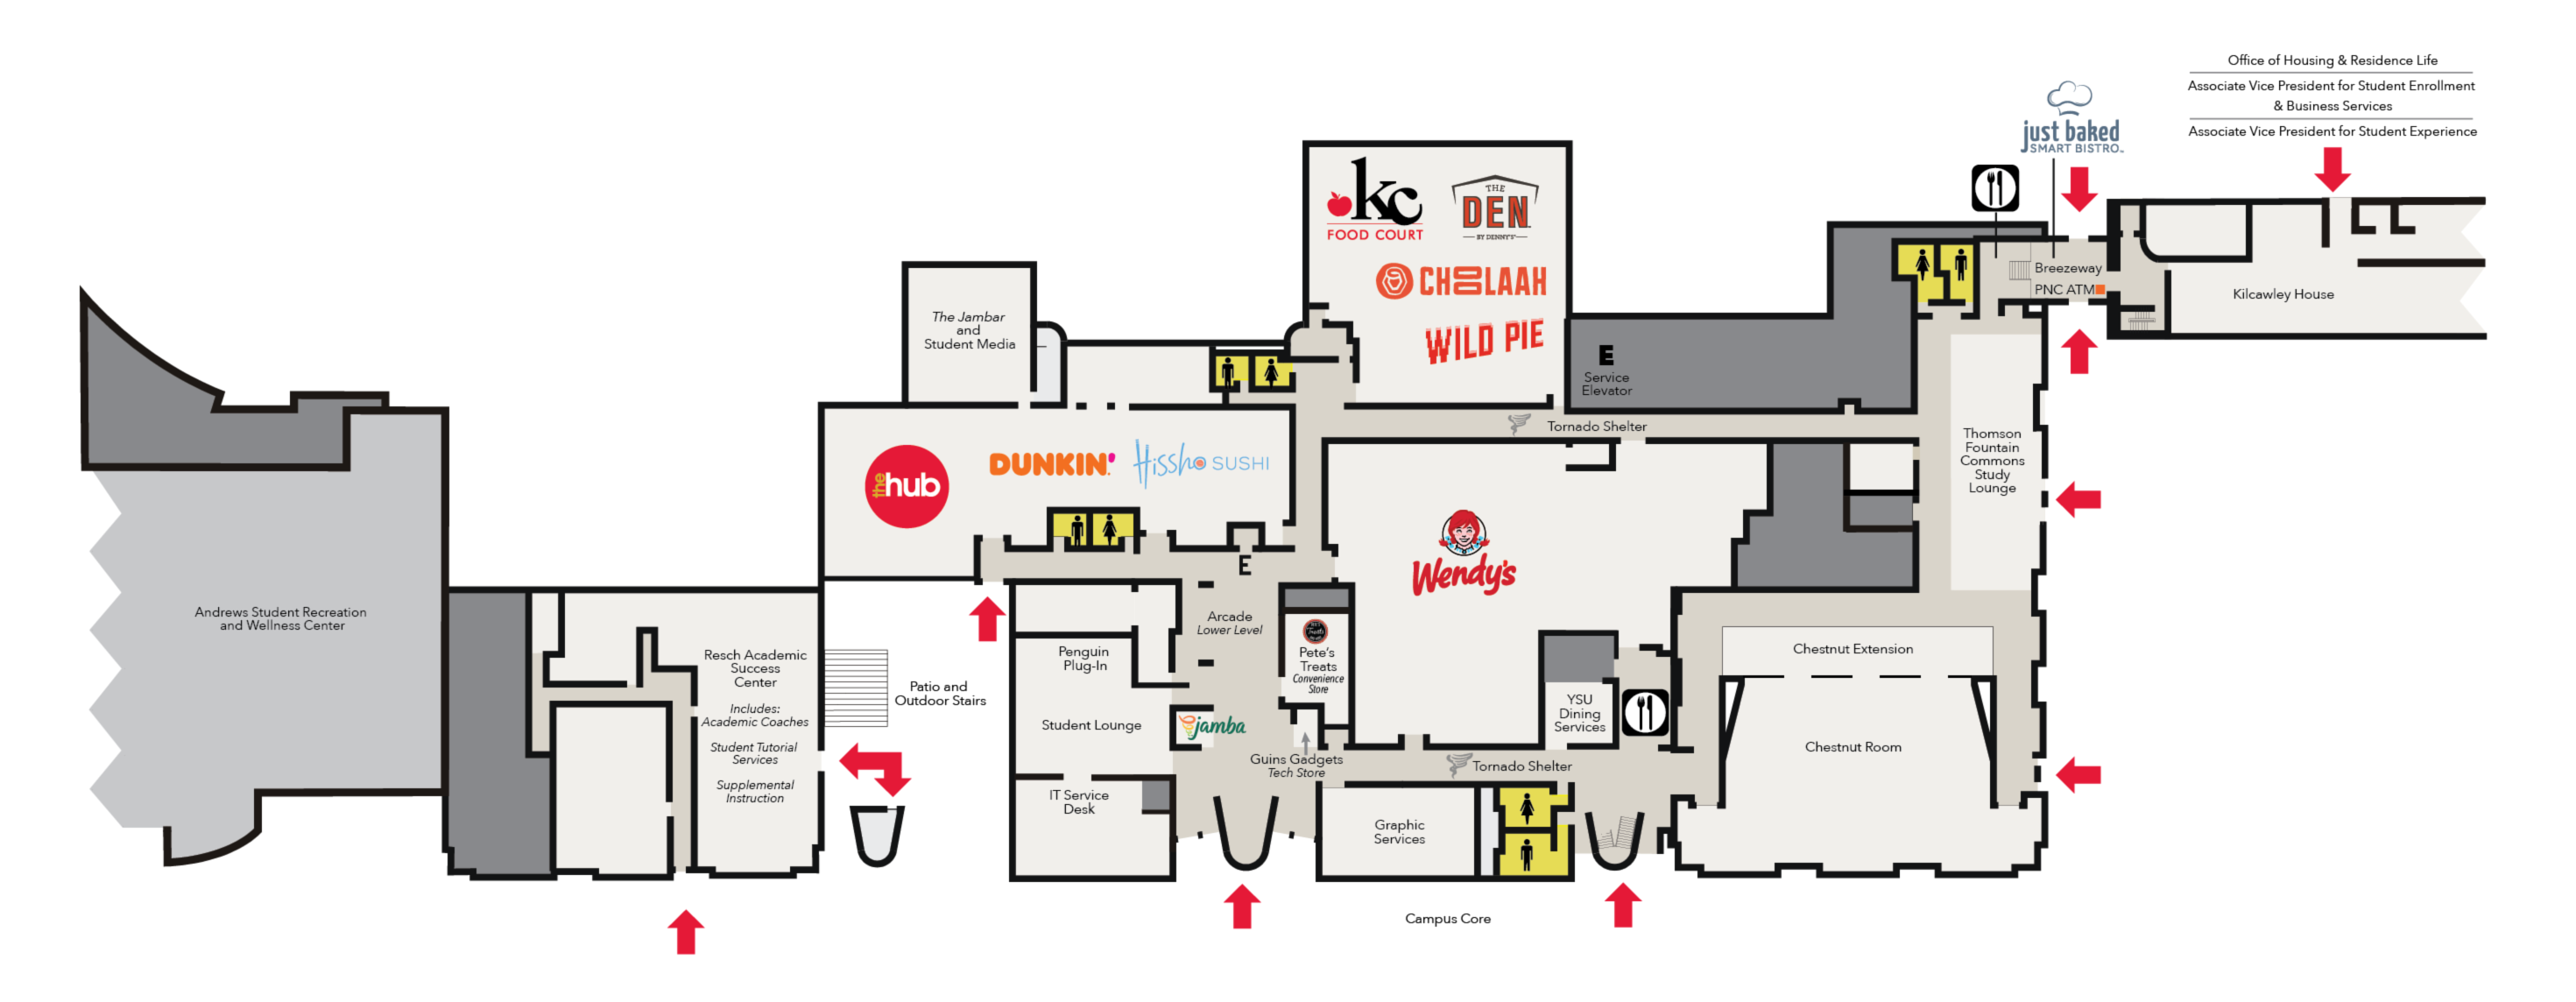 map of lower level of kilcawley center with room names, and restaurant names etc…